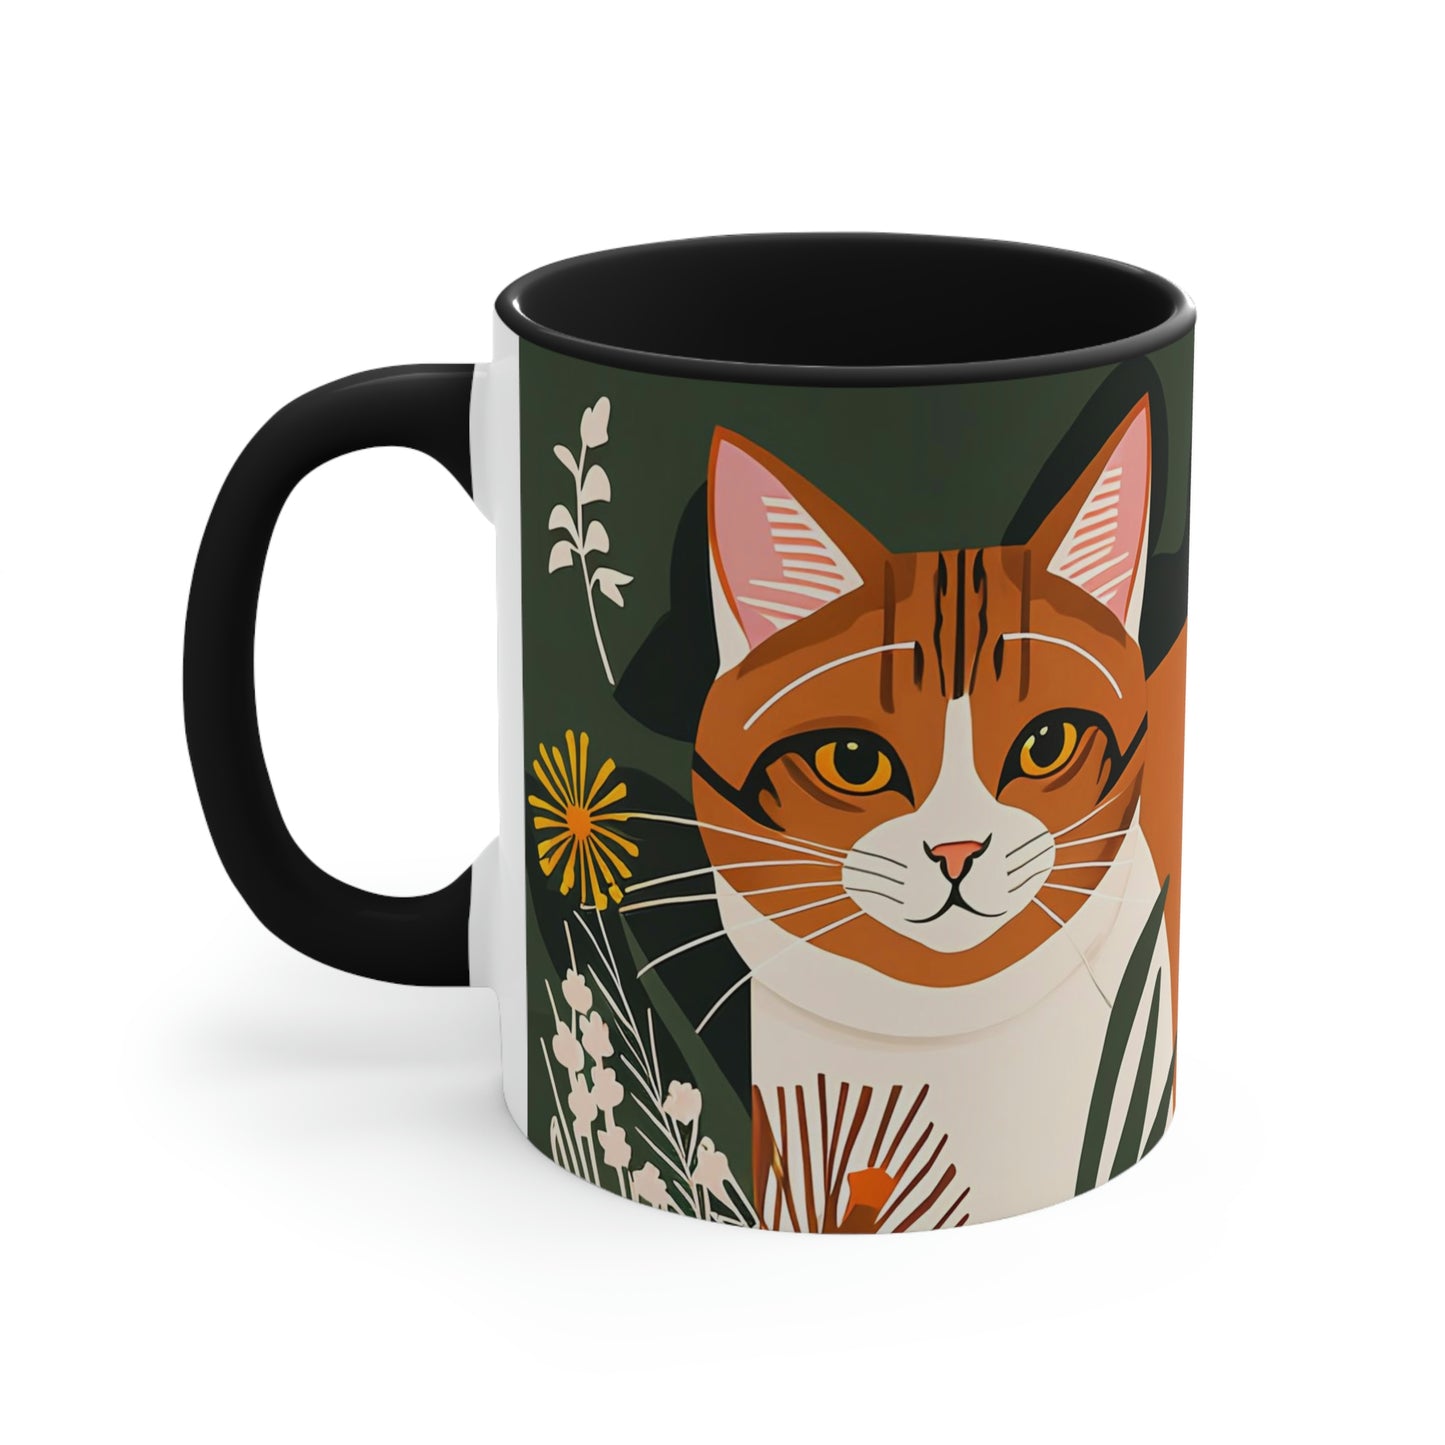 Two Orange and White Cats, Ceramic Mug - Perfect for Coffee, Tea, and More!